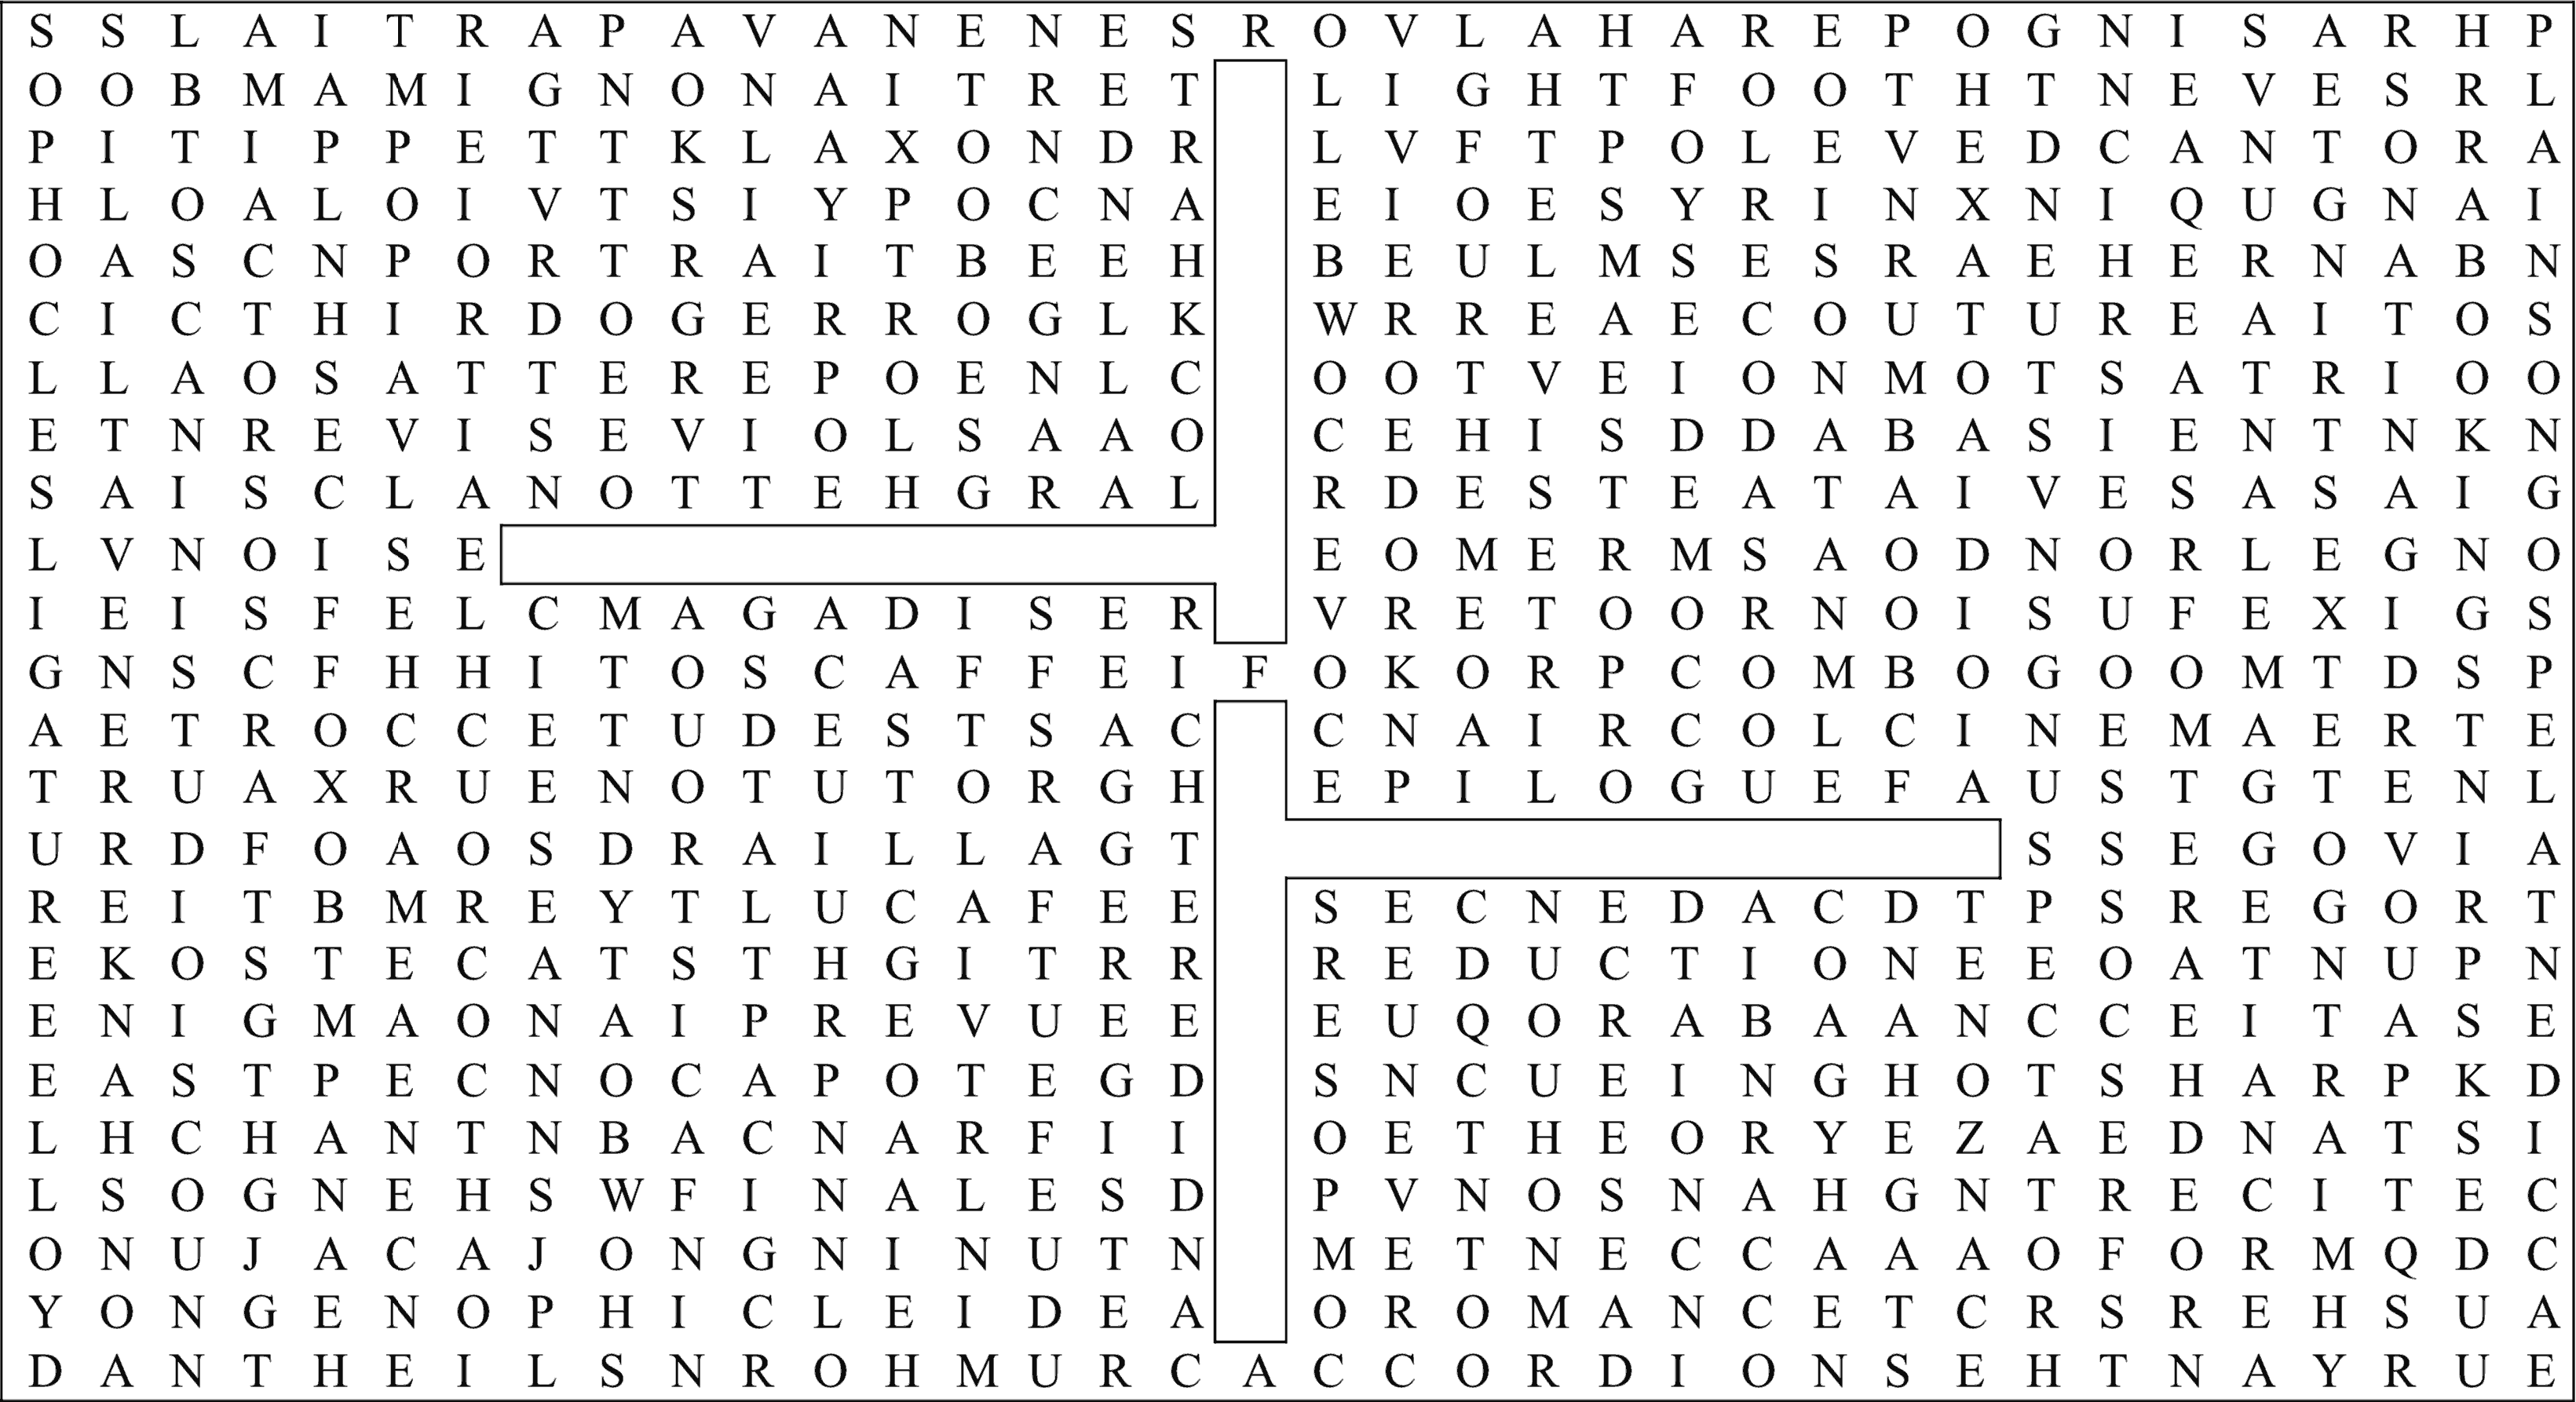 Locrian word puzzle by Allan Rae